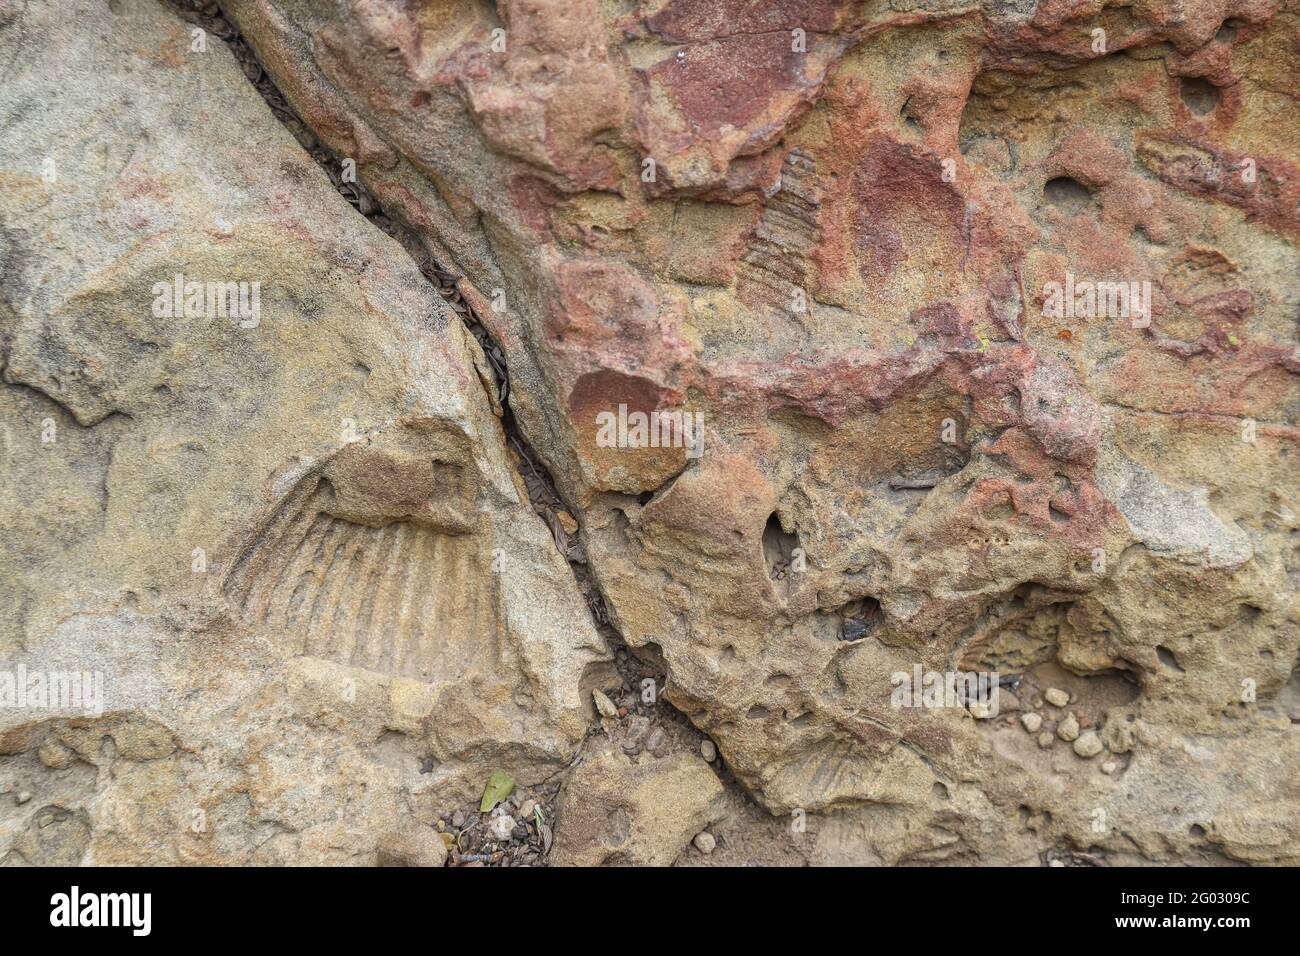 GAVIOTA STATE PARK, CALIFORNIA, UNITED STATES - Apr 13, 2021: A shell fossil is visible in a sandstone rock. Stock Photo